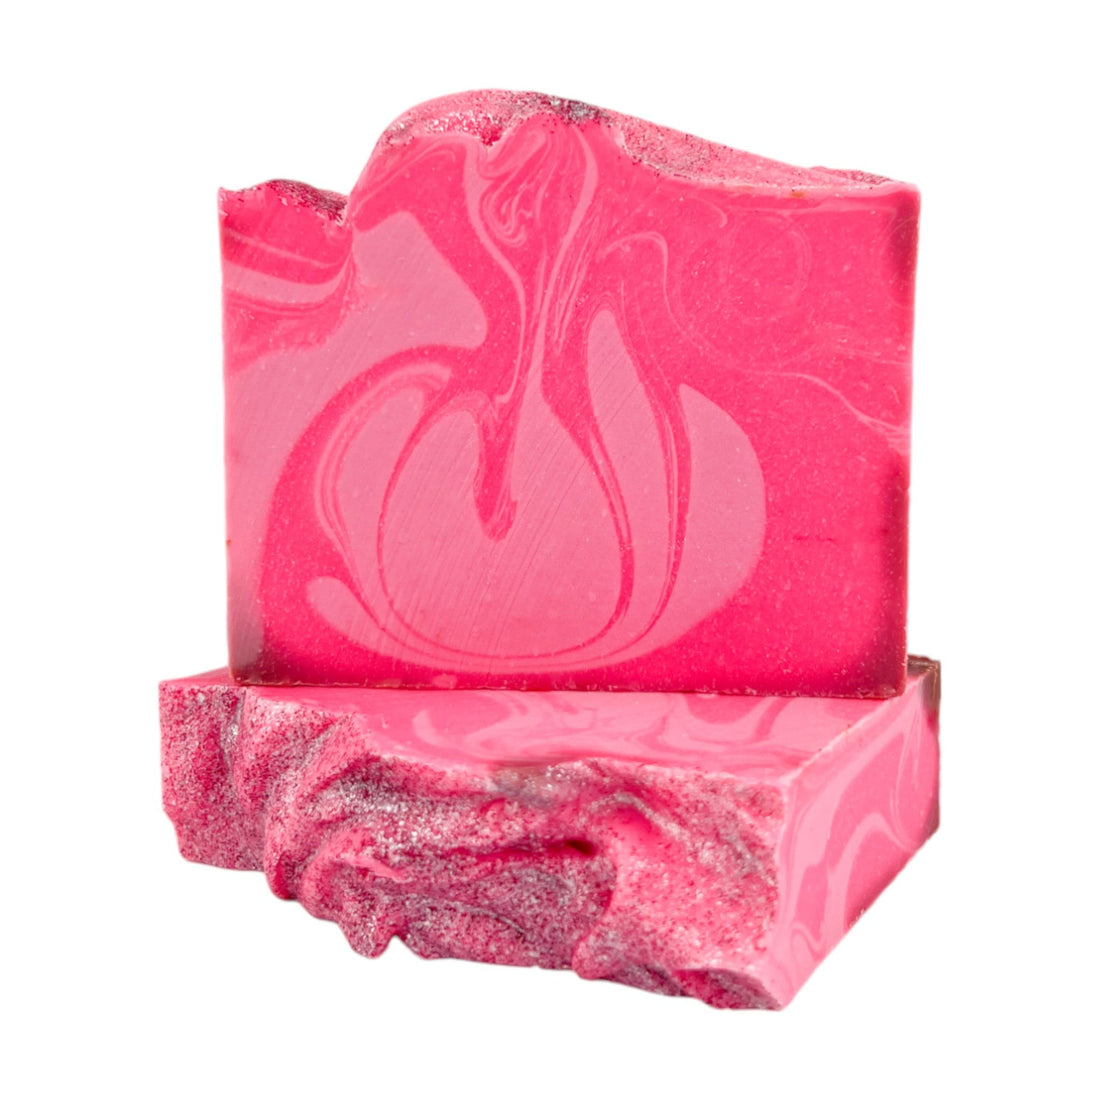 Pink Sugar -Bar Soap - Old Town Soap Co.